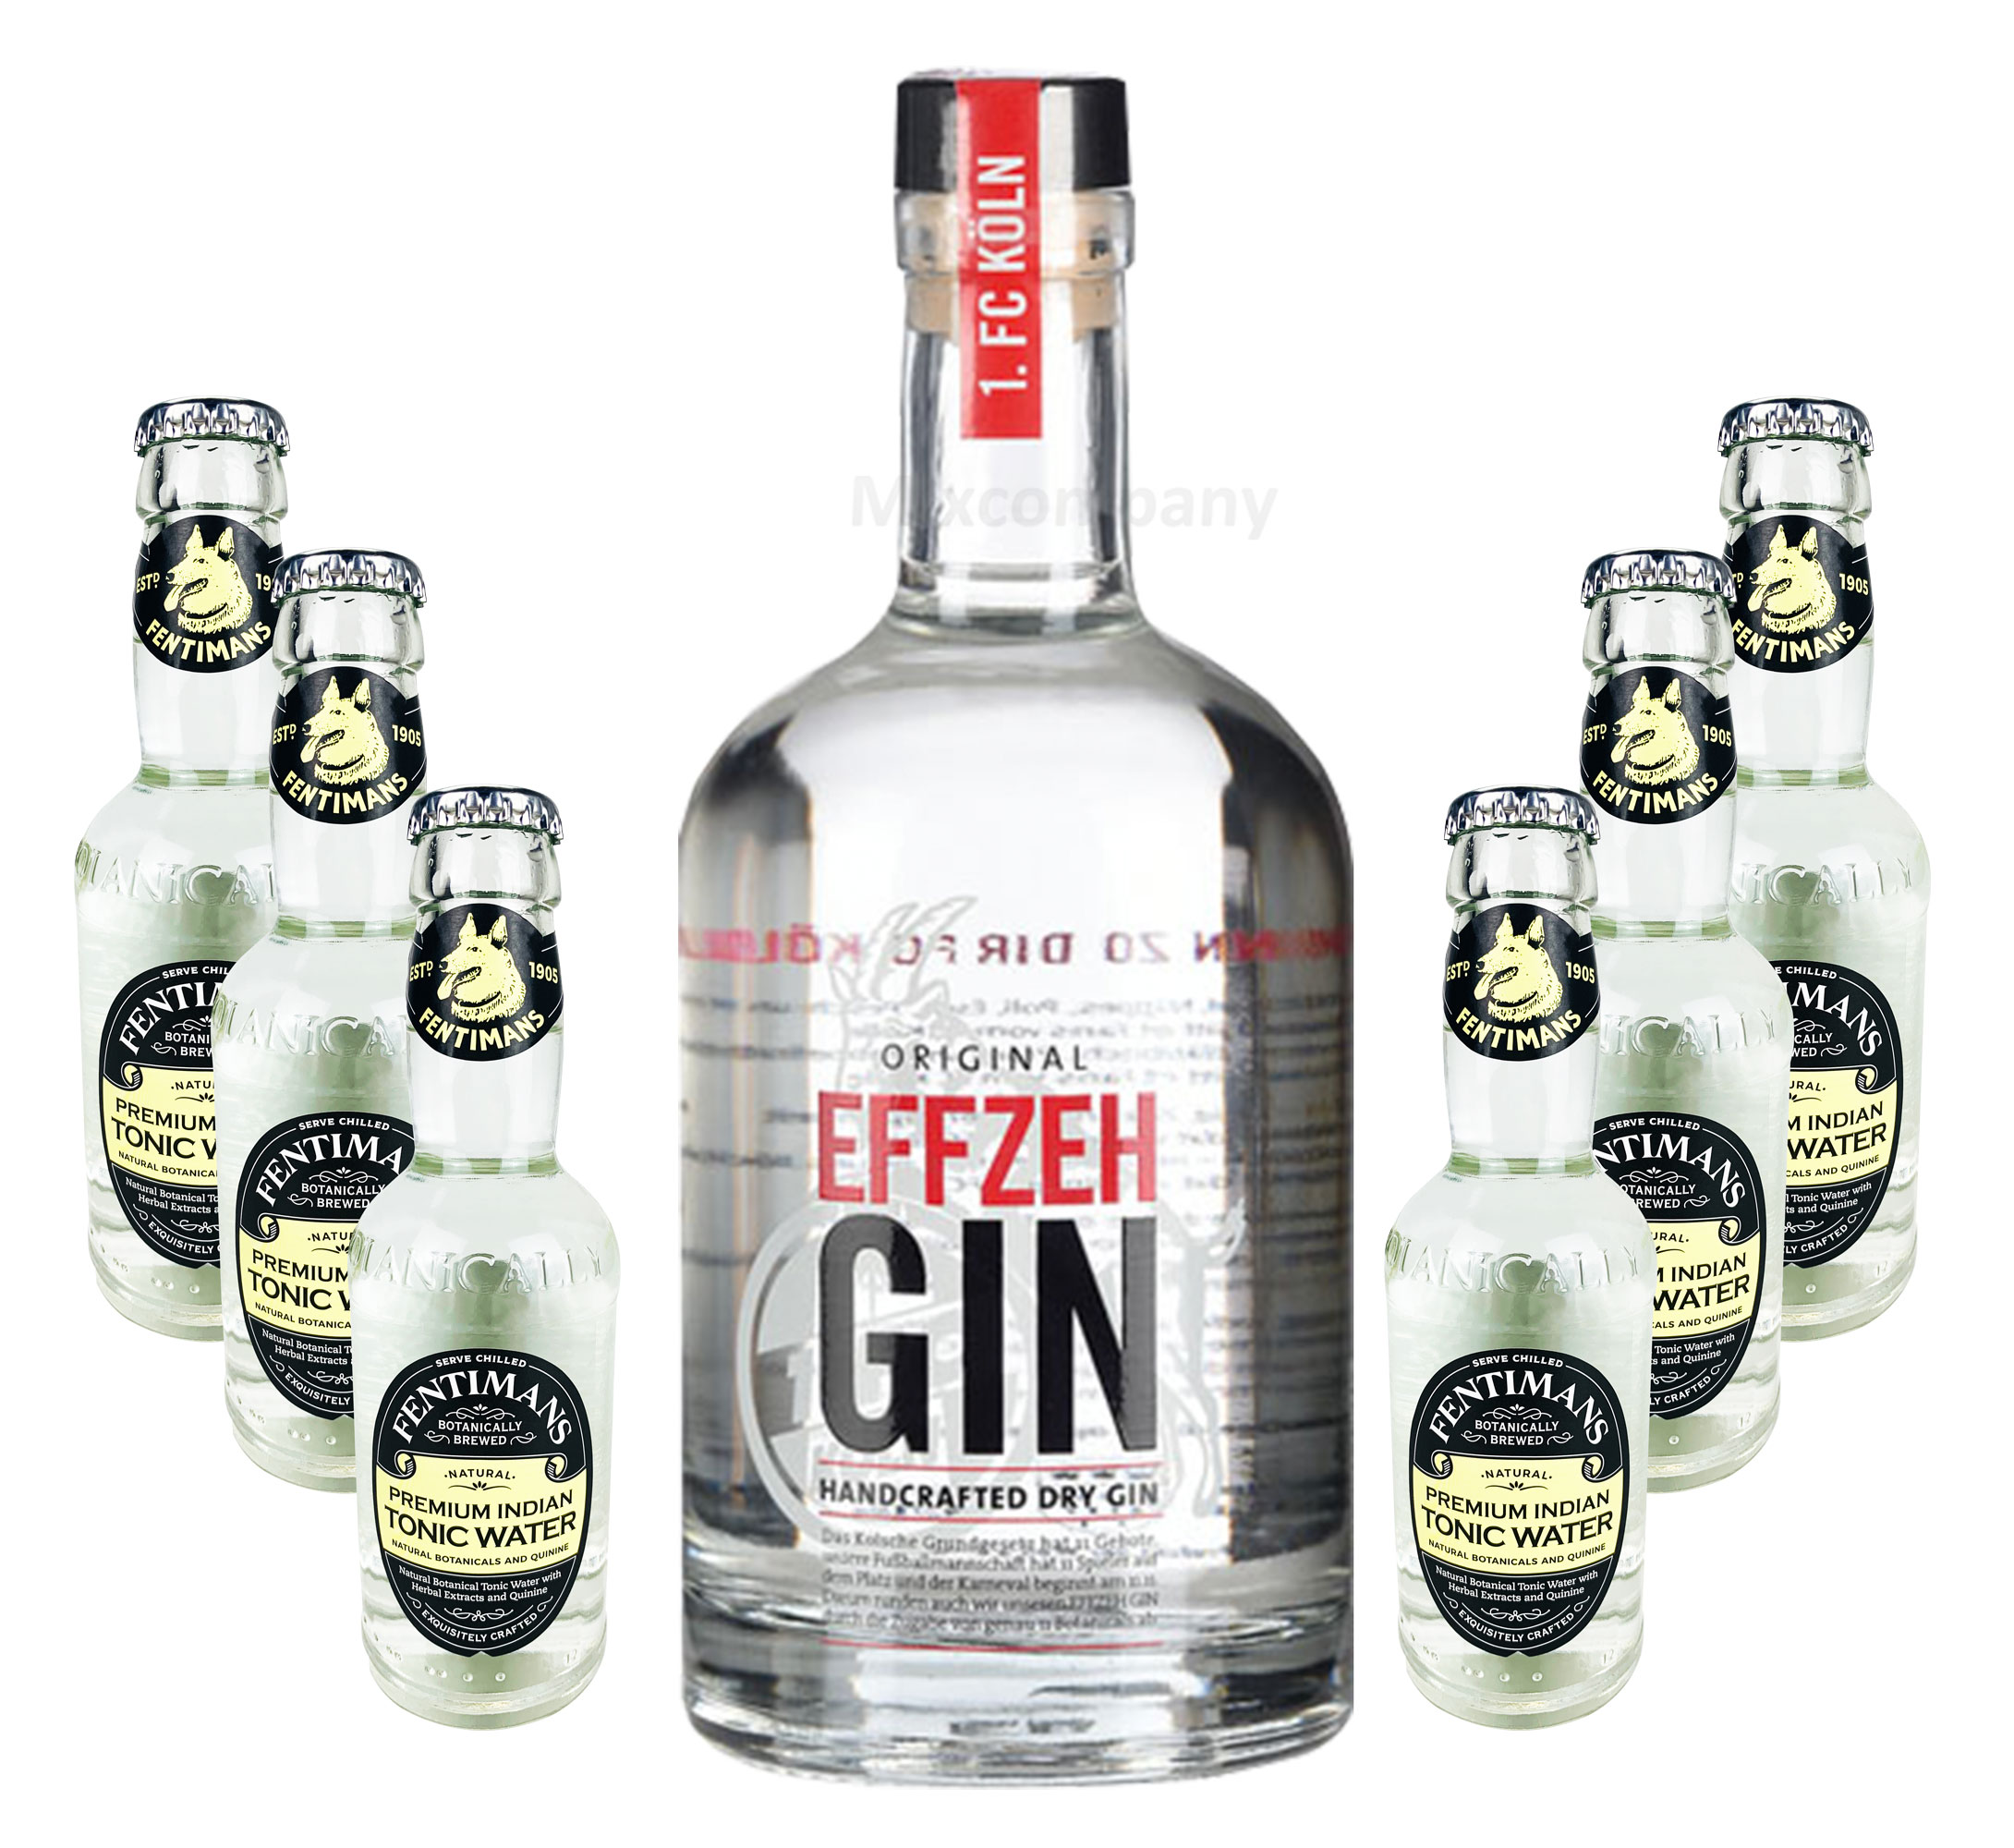 Effzeh Handcrafted Dry Gin 0,5l 500ml (42% Vol) + 6xFentimans Premium Indian Tonic Water 0,2l MEHRWEG inkl. Pfand Gin Tonic Bar- [Enthält Sulfite]